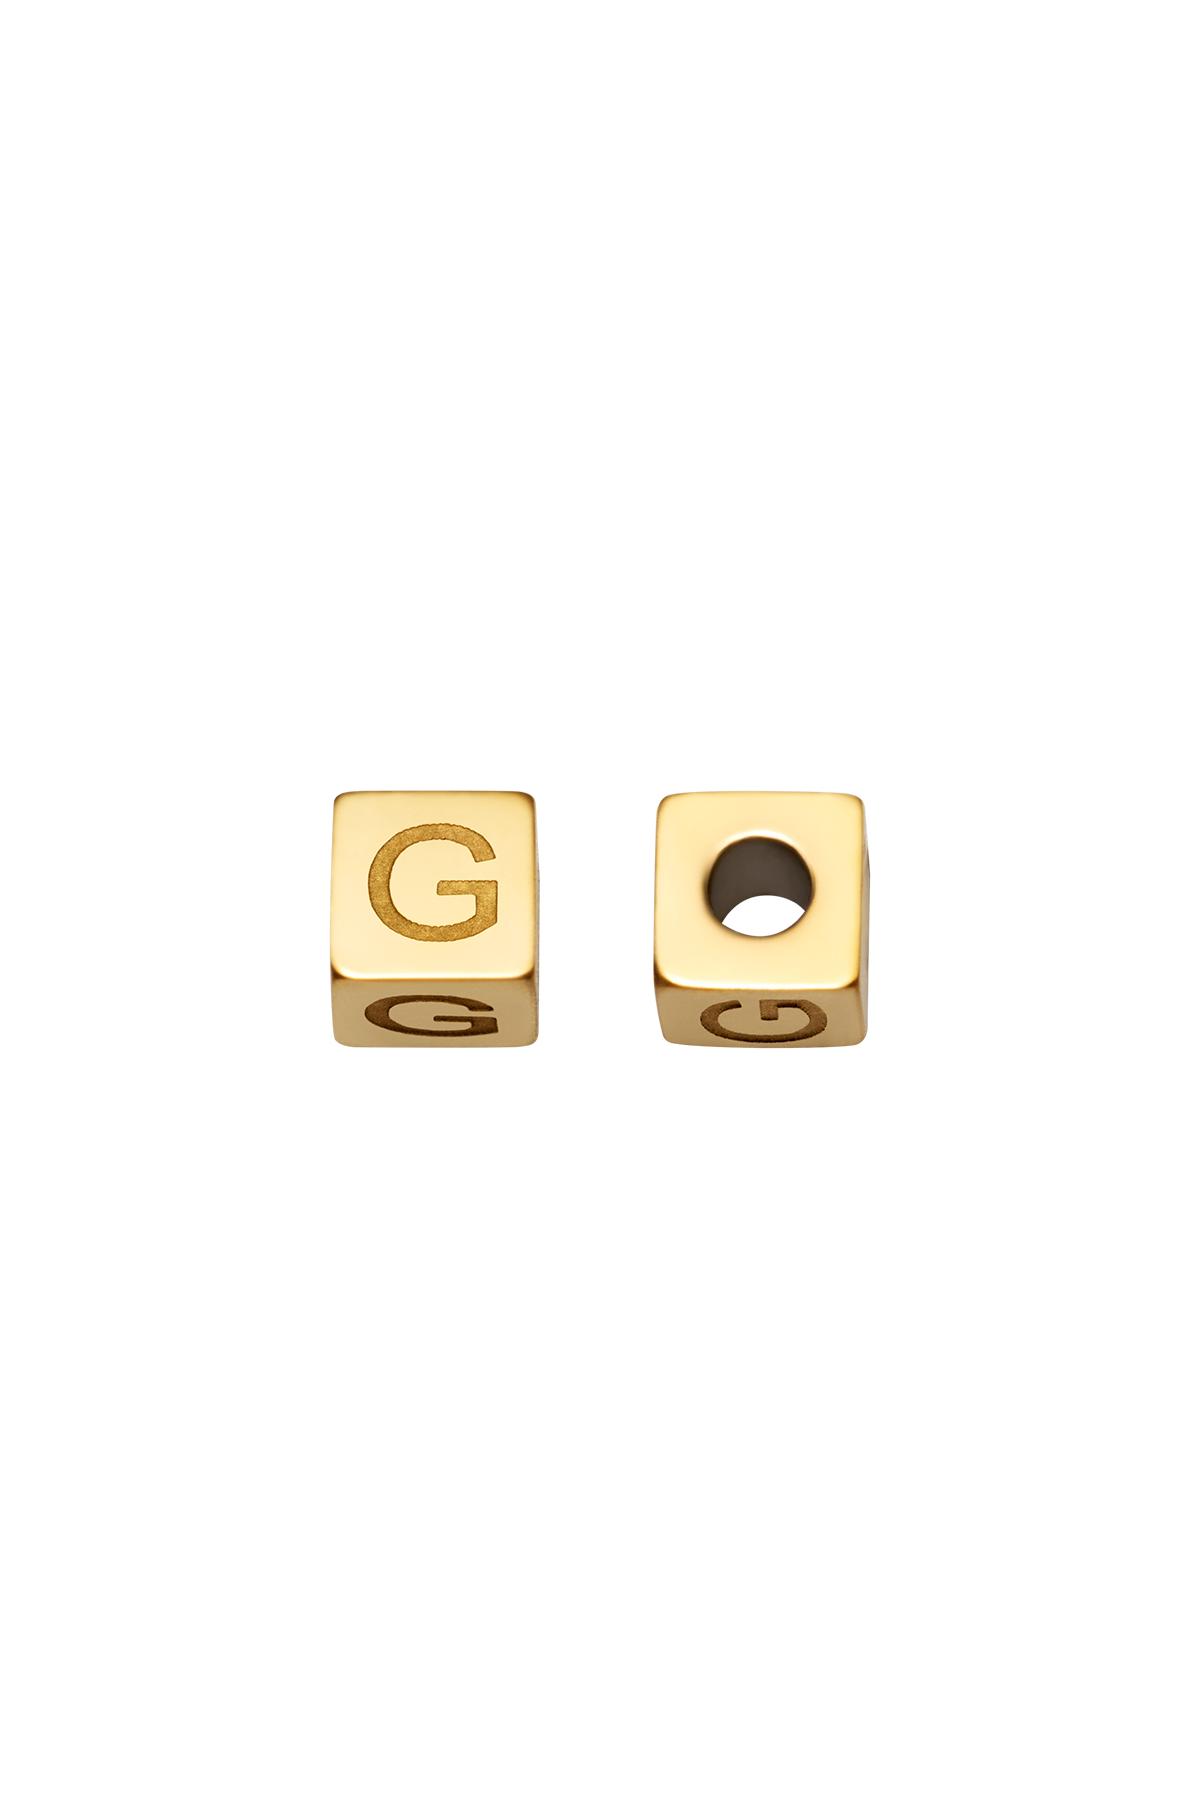 Gold / DIY Beads Alphabet Gold G Stainless Steel Picture5